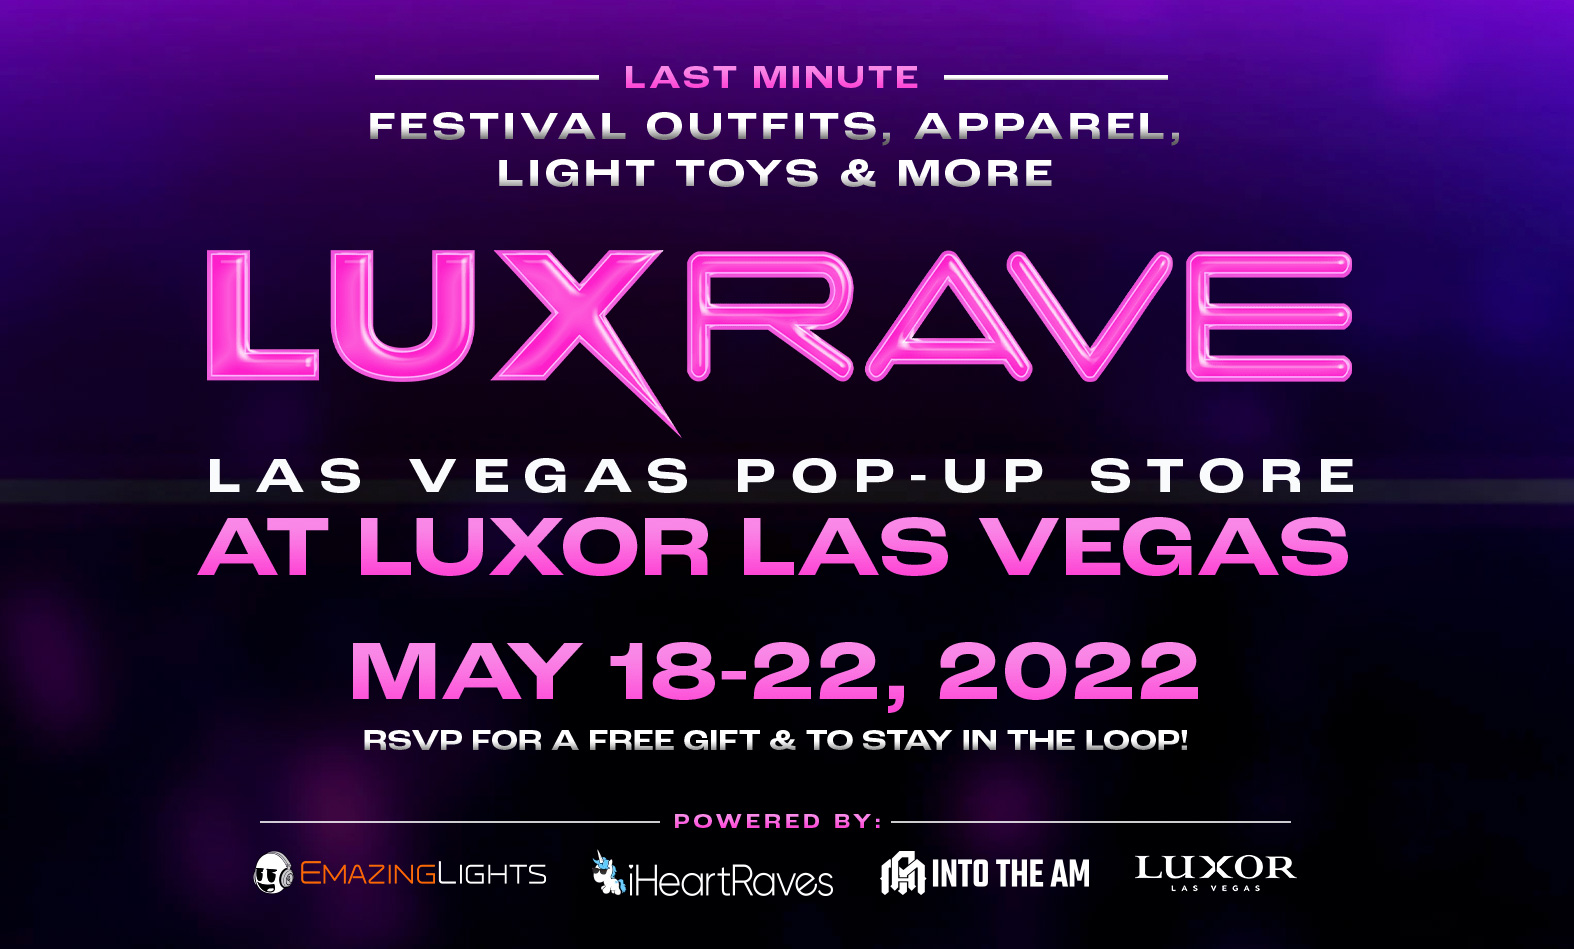 iHeartRaves will again host pop-up shop during EDC Week